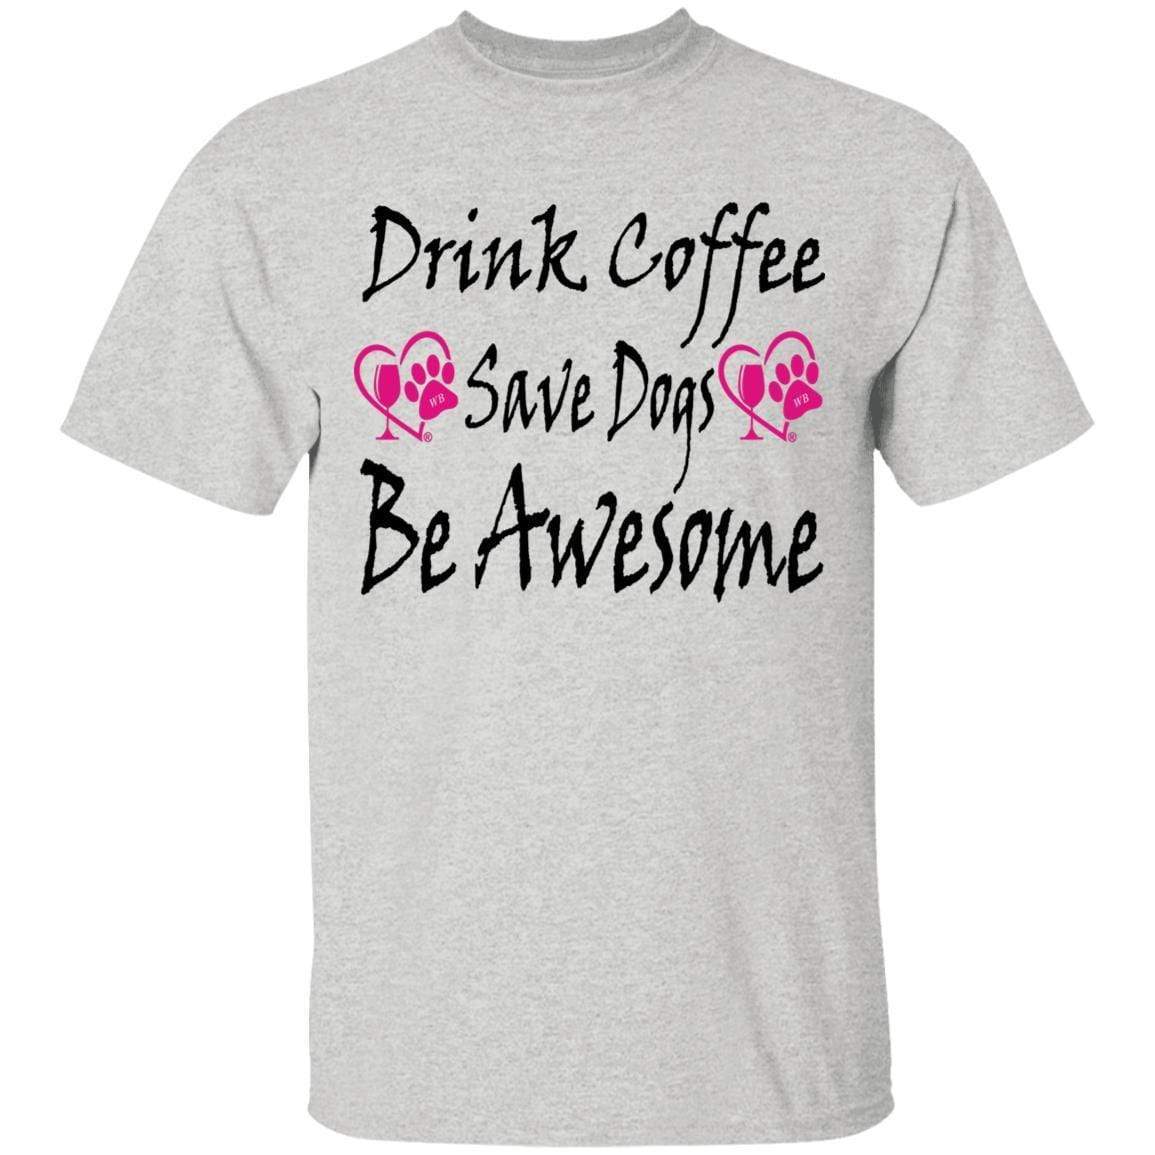 T-Shirts Ash / S Winey Bitches Co "Drink Coffee Save Dogs Be Awesome" 5.3 oz. T-Shirt WineyBitchesCo